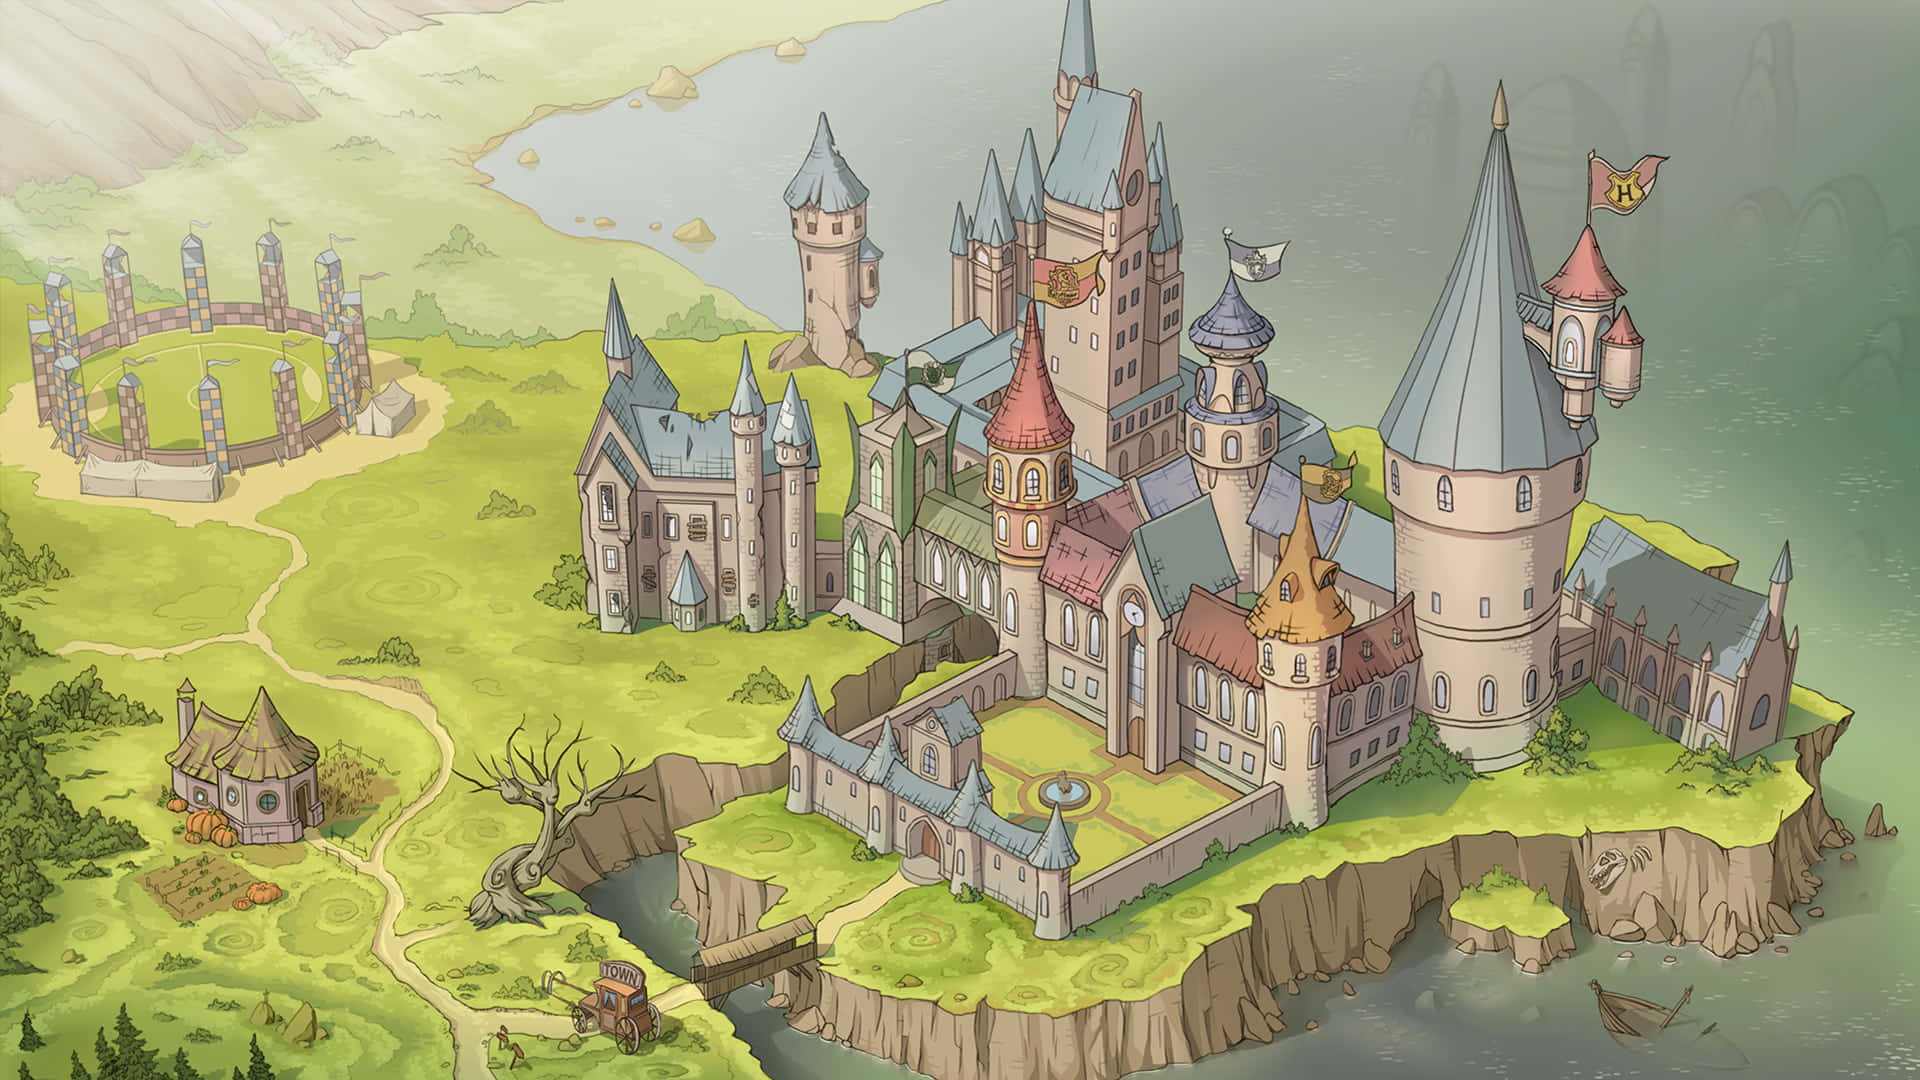 Explore the Magical World of Hogwarts